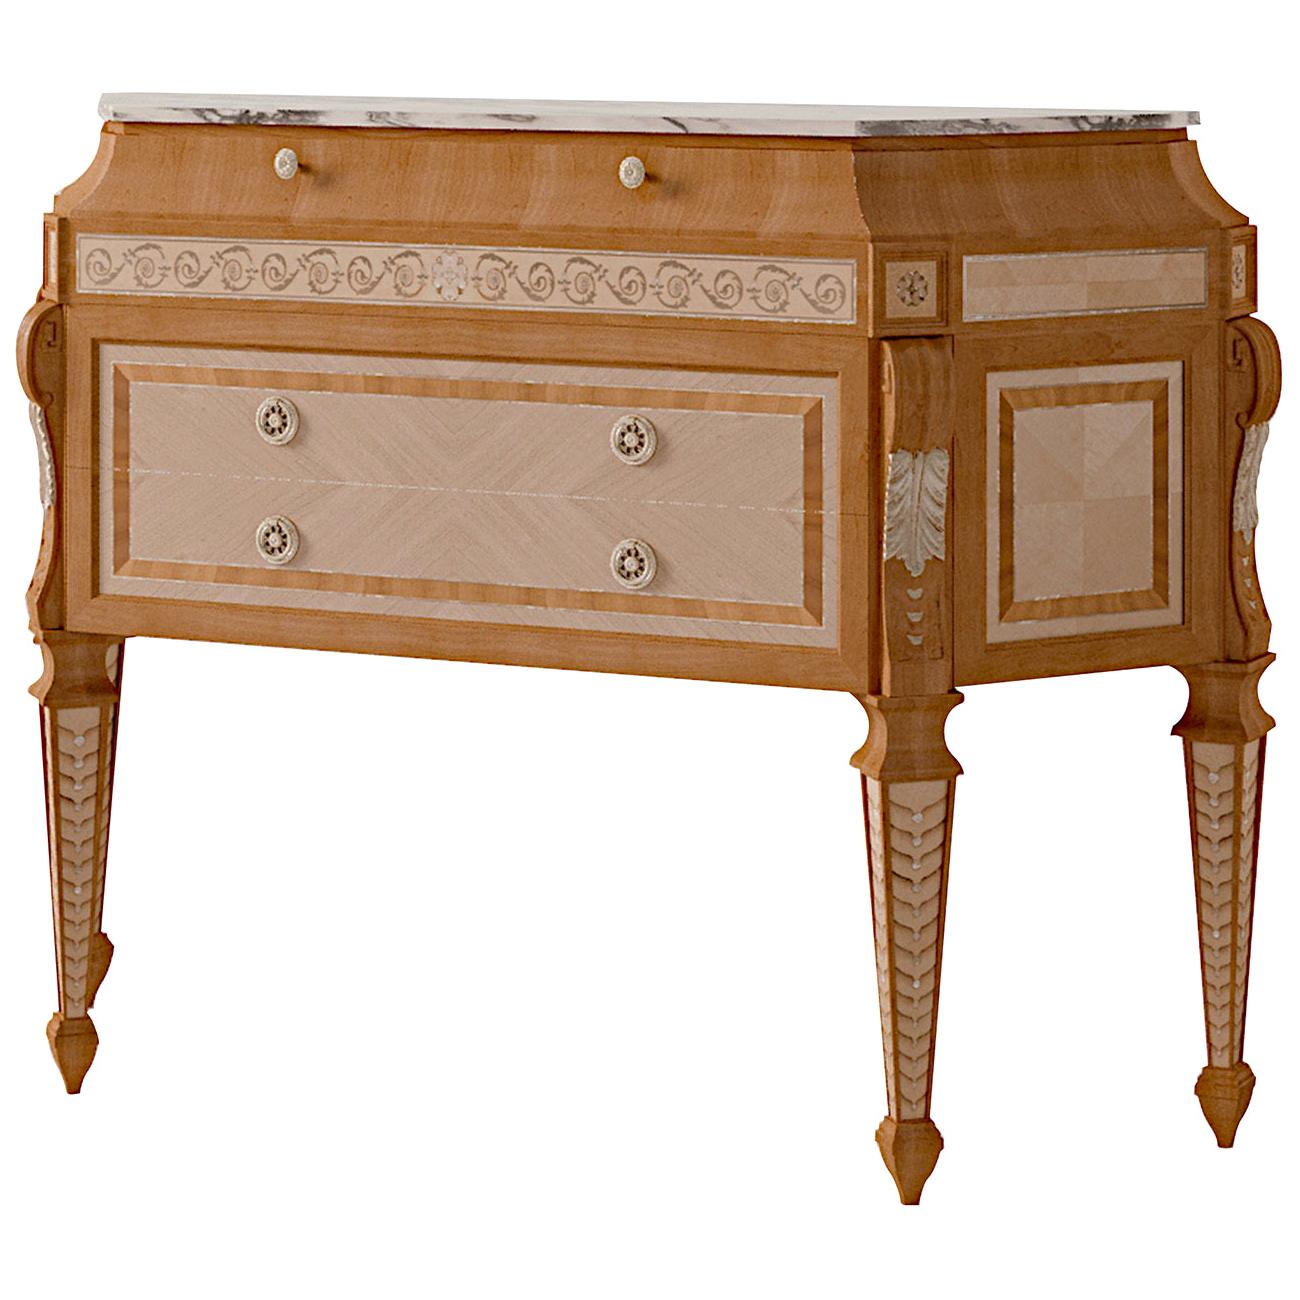 White Maple and Cherry Console with Calacatta Marble Top